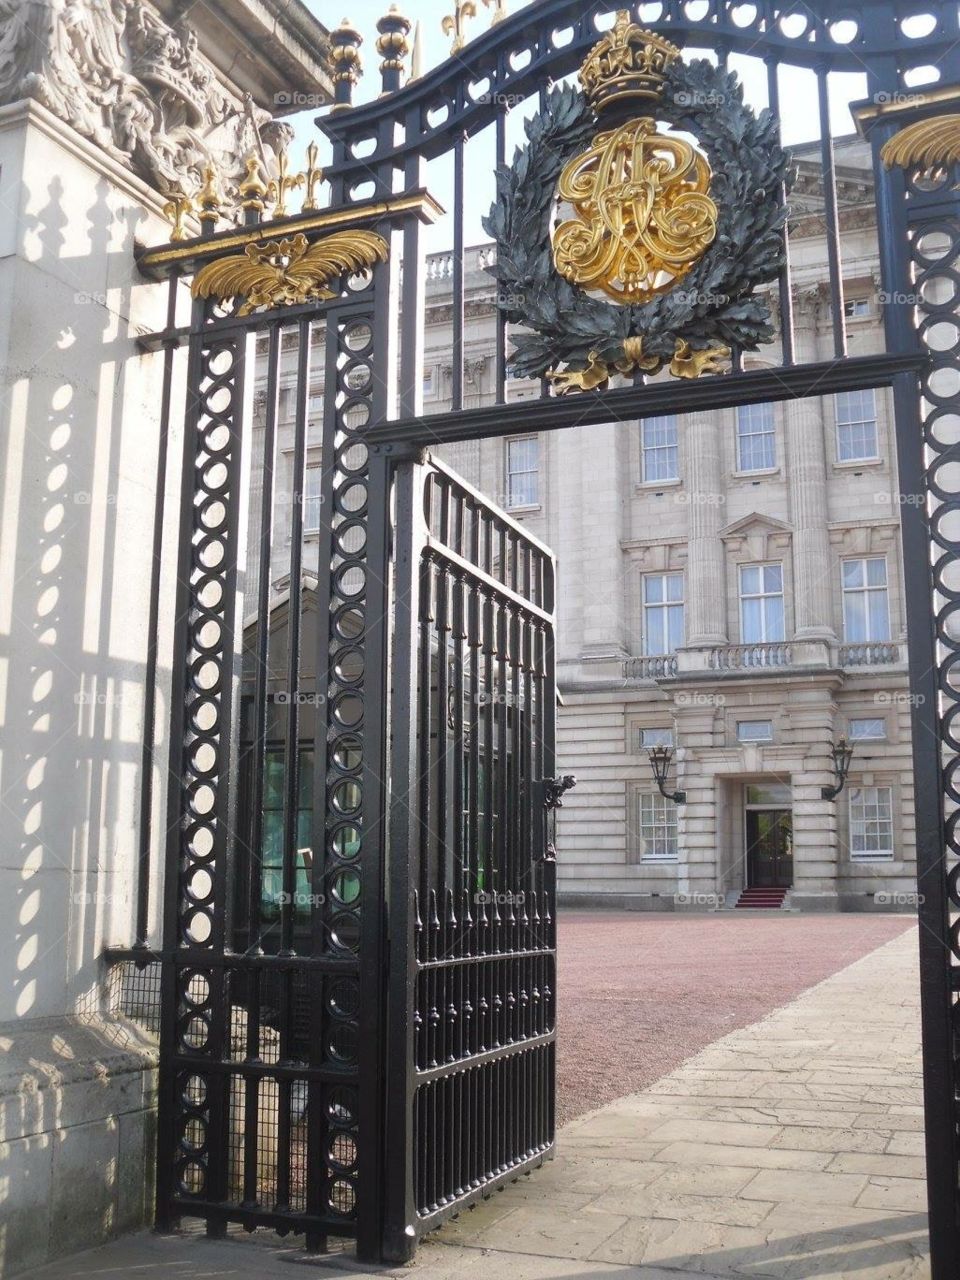 Entry to the palace